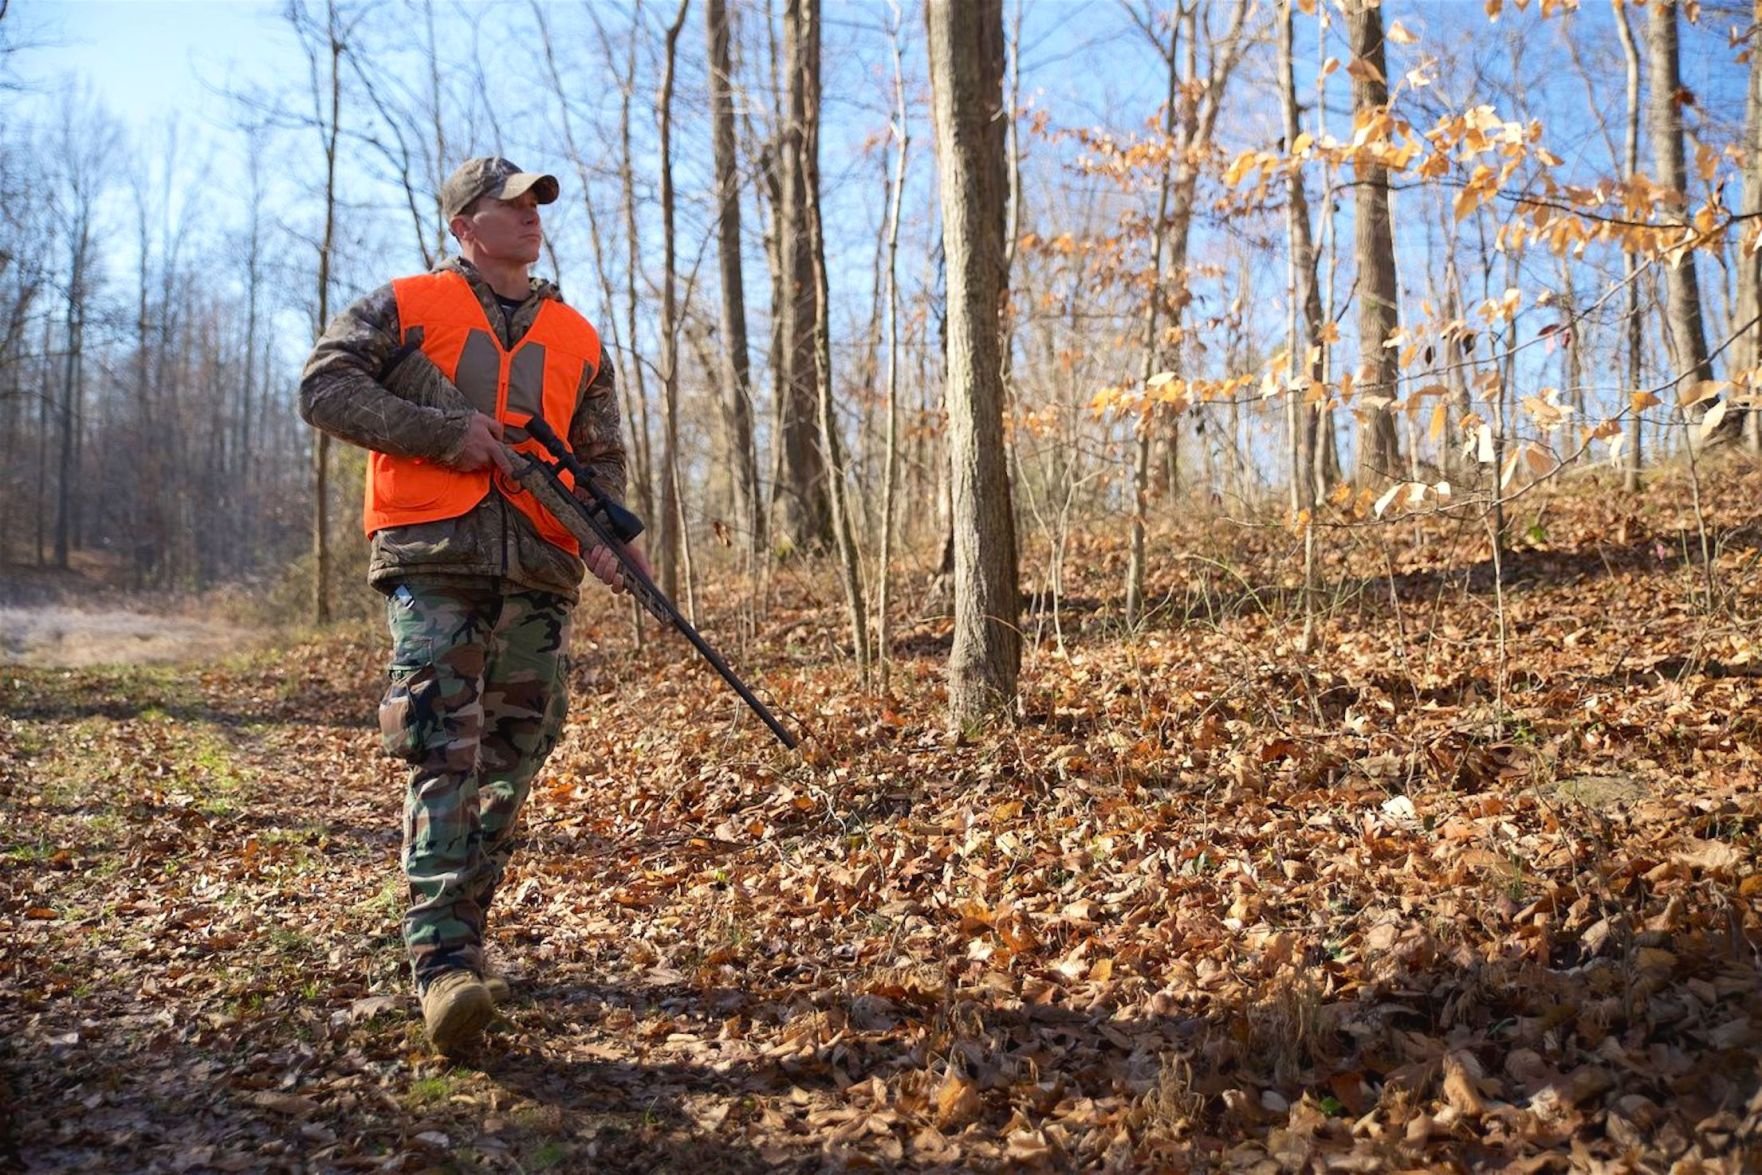 where is it okay to drive when hunting on private property